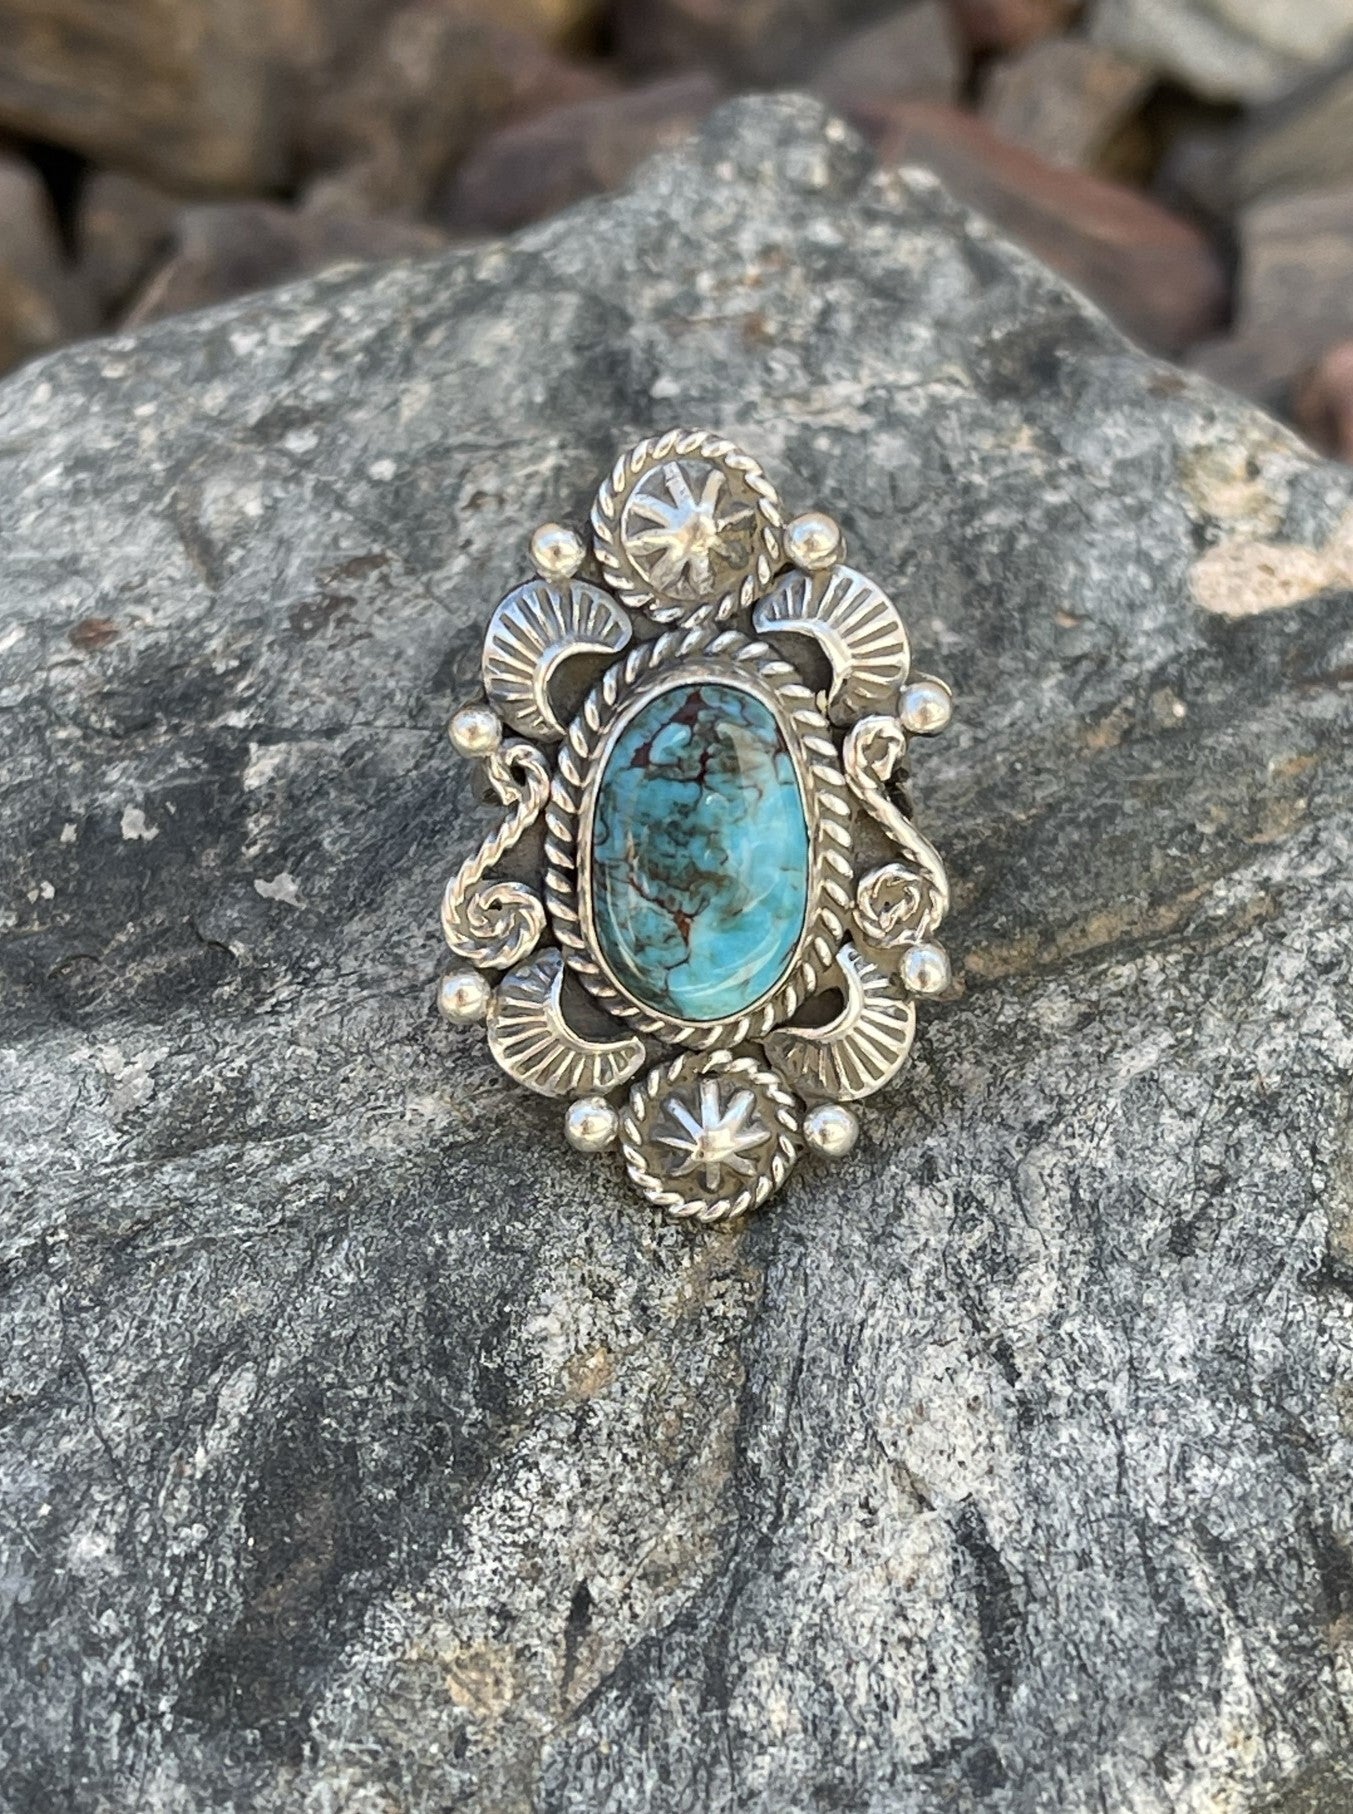 Hand Crafted Turquoise Ring with Stamp Bead Detail